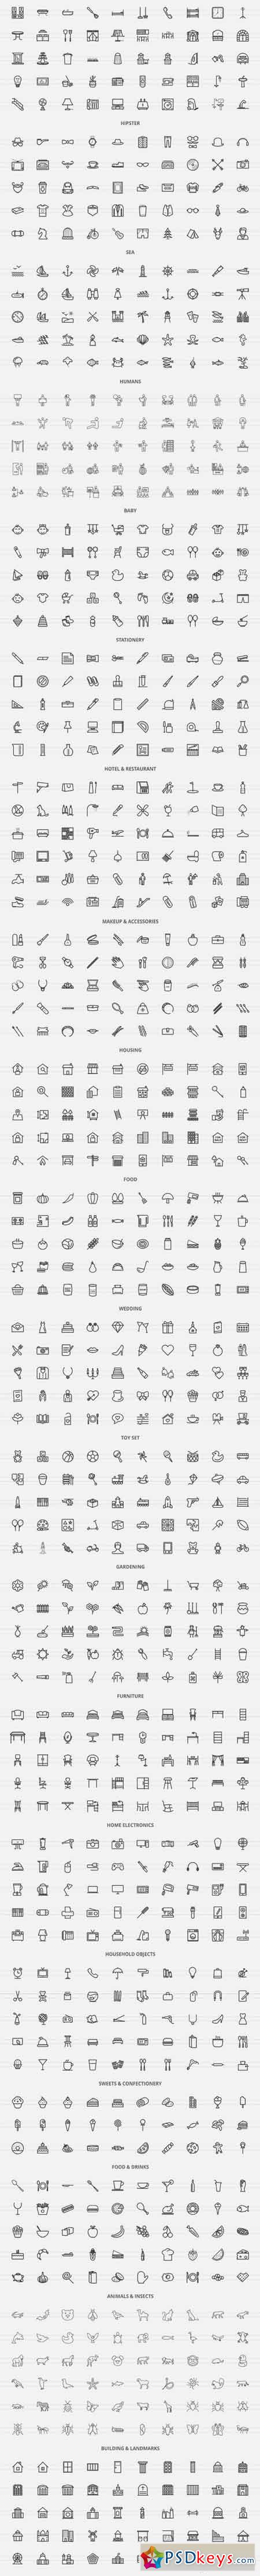 2490 Nature & Lifestyle Line Icons 2037530